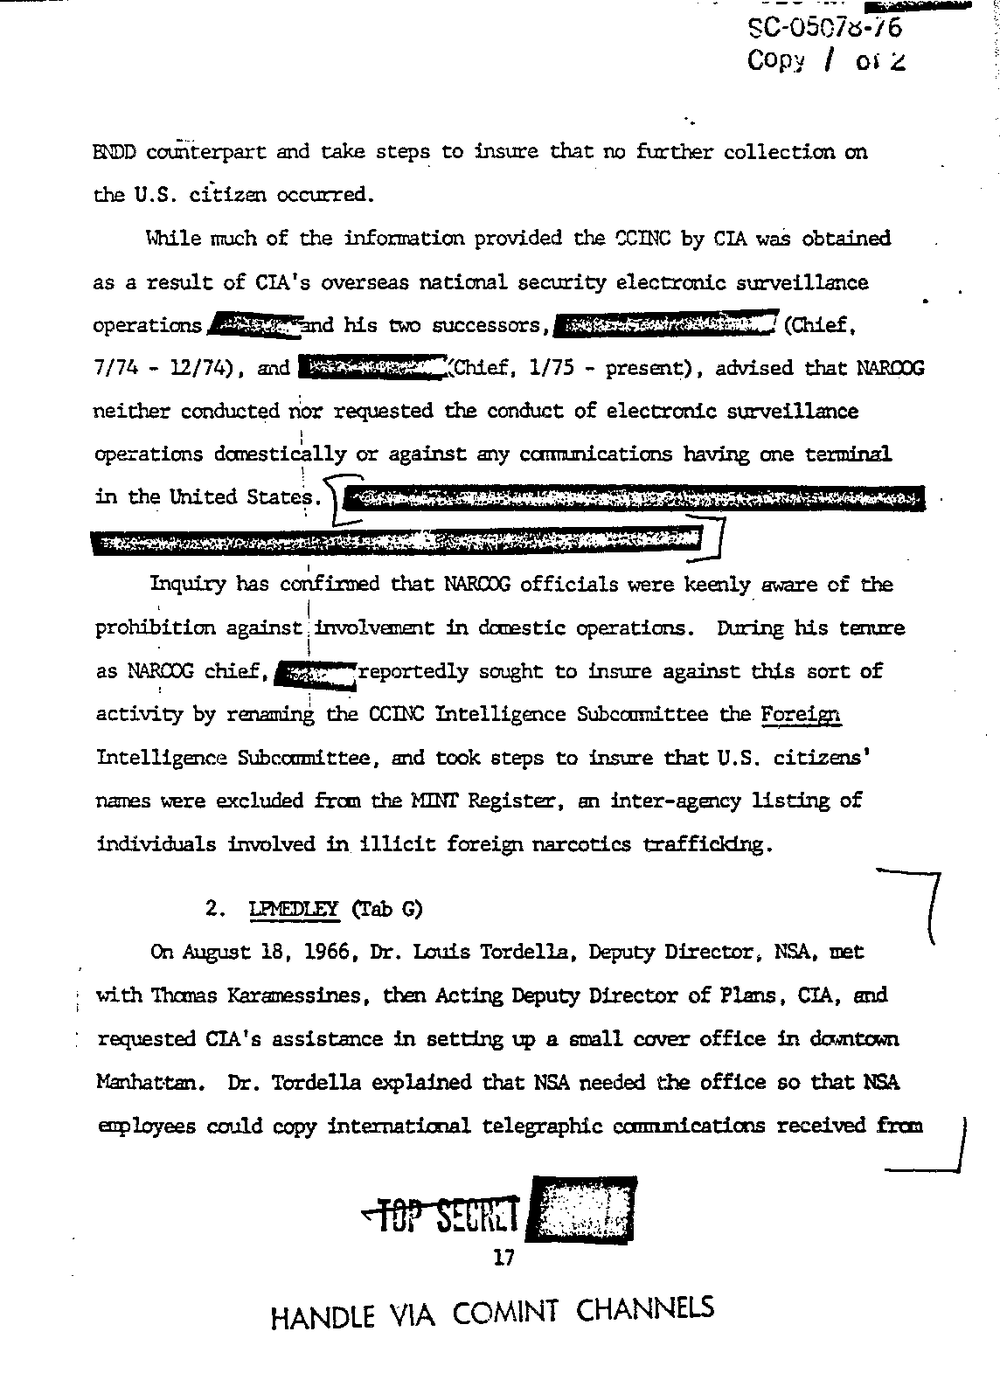 Page 25 from Report on Inquiry Into CIA Related Electronic Surveillance Activities